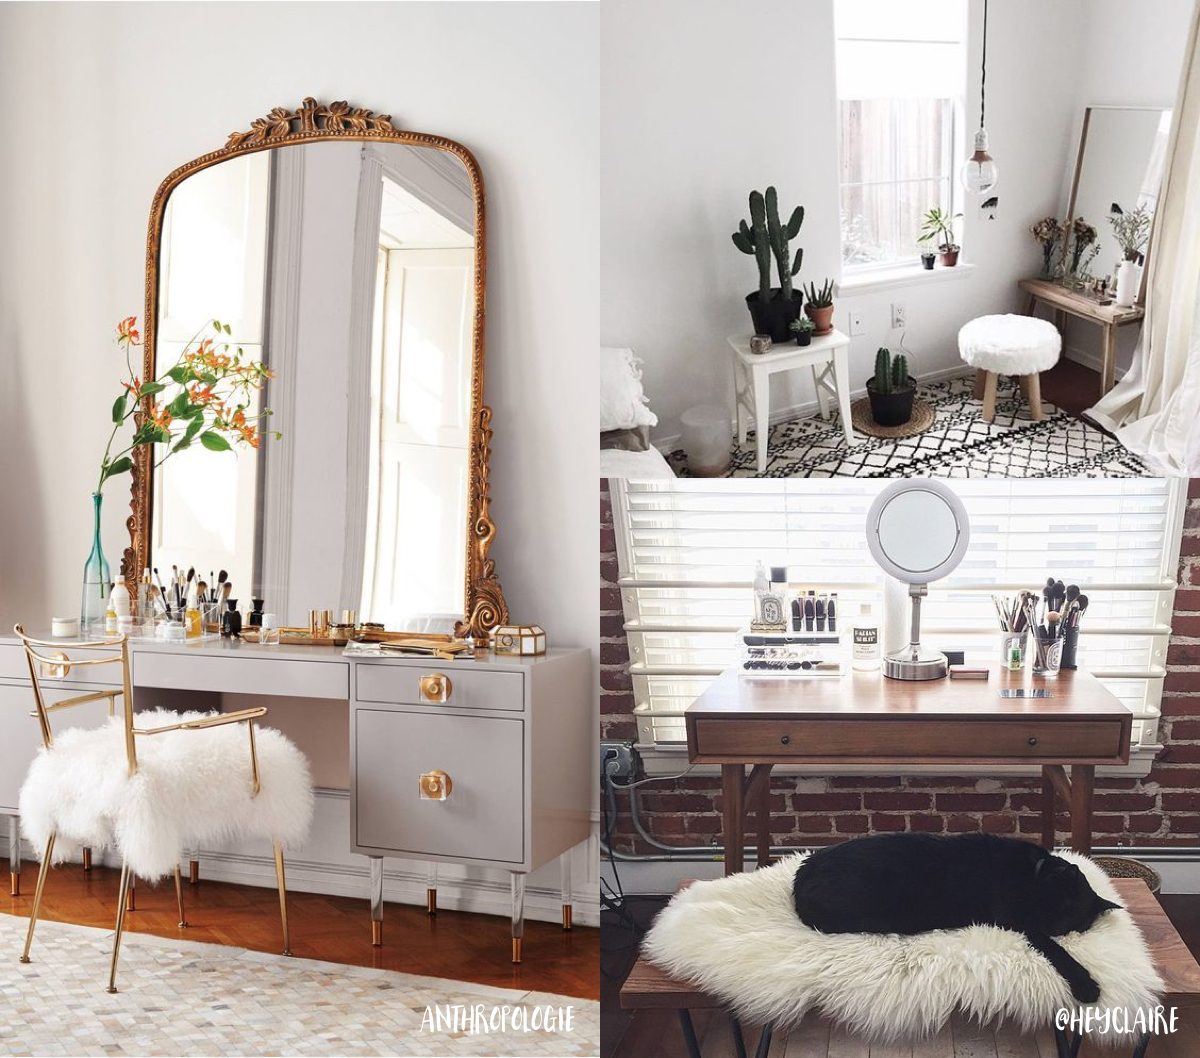 Dressing Tables - curated from Pinterest for lovefromberlin.net